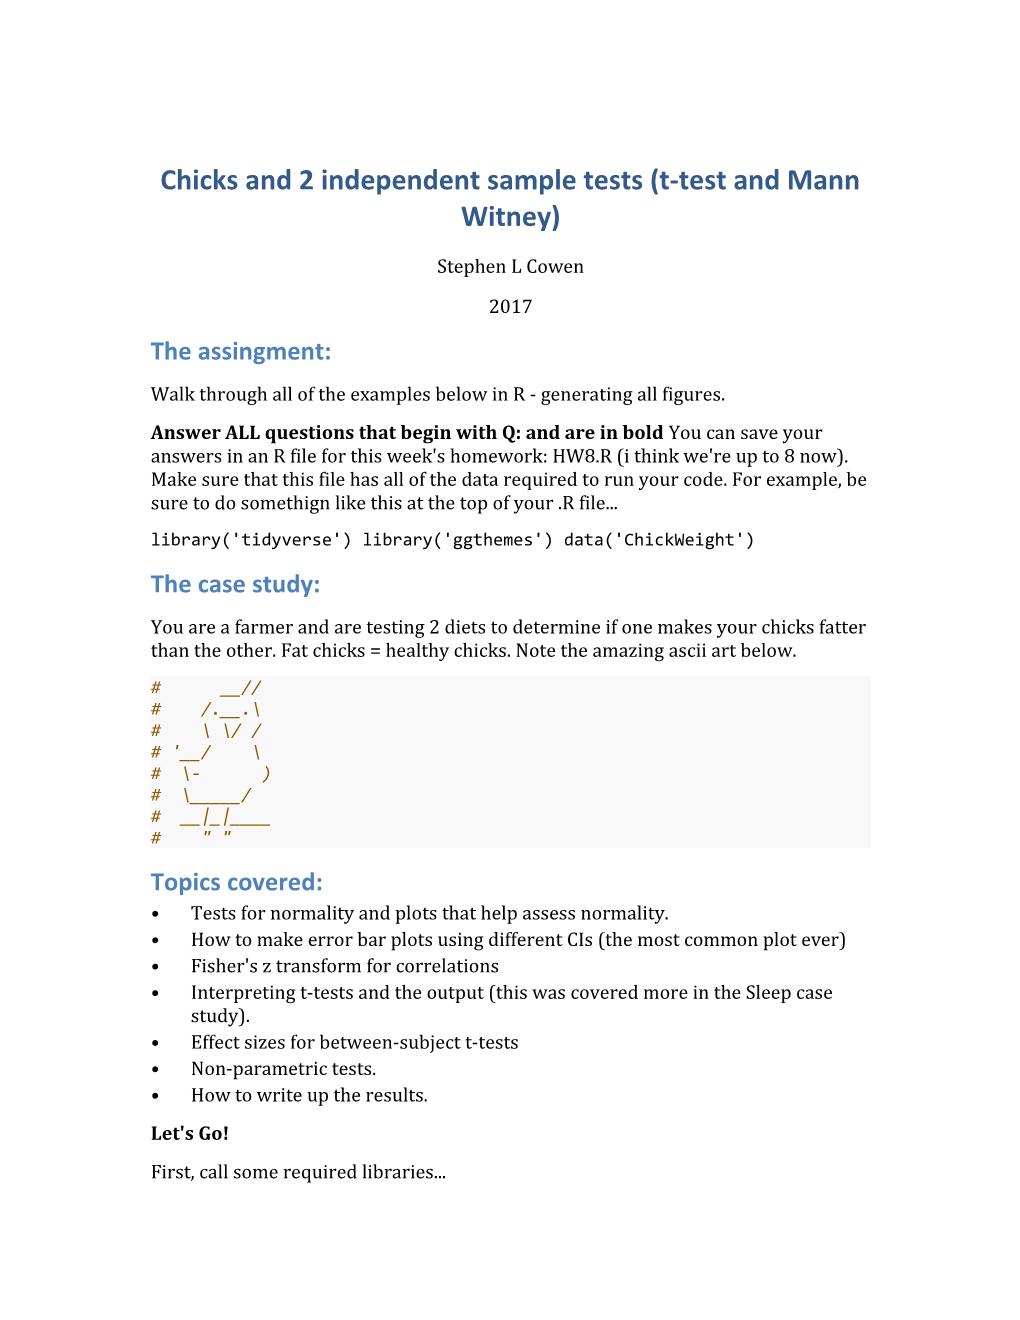 Chicks and 2 Independent Sample Tests (T-Test and Mann Witney)